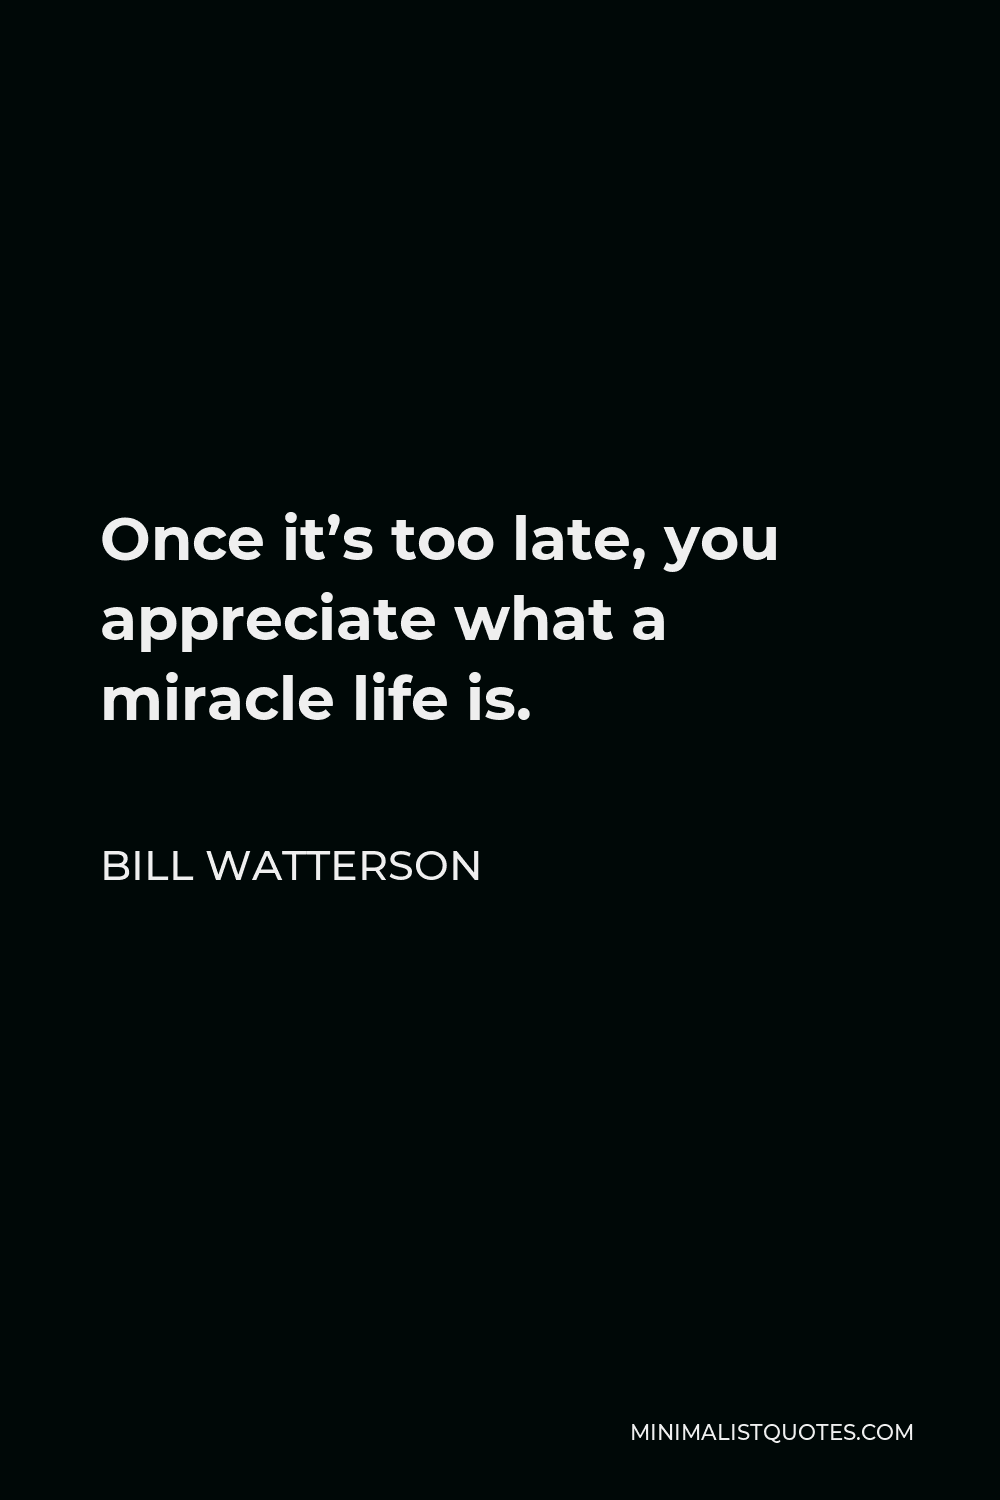 Bill Watterson Quote - Once it’s too late, you appreciate what a miracle life is.